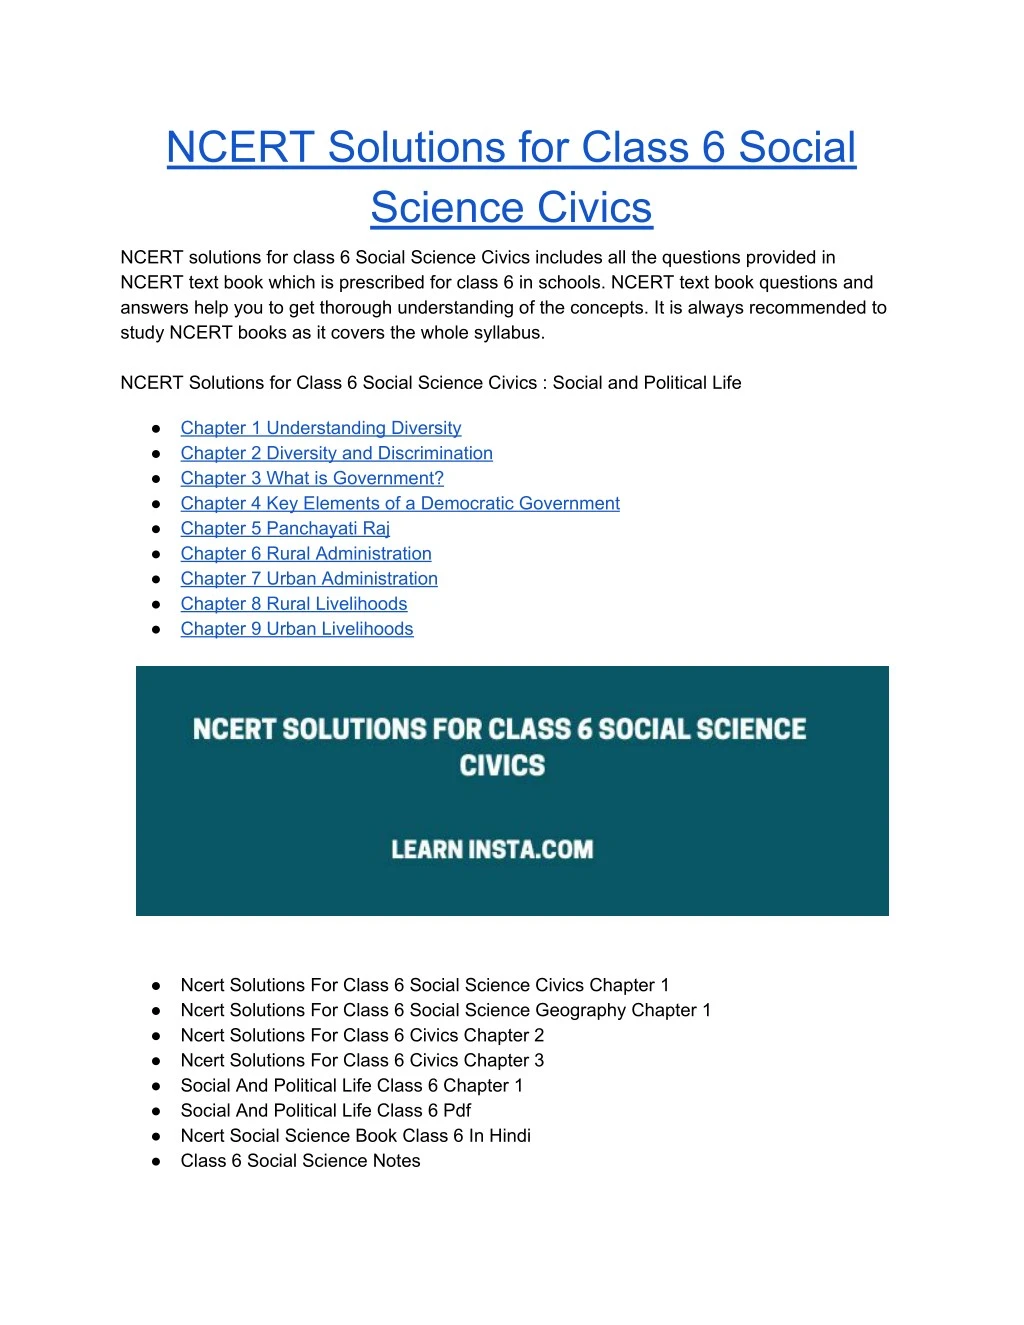 ncert solutions for class 6 social science civics